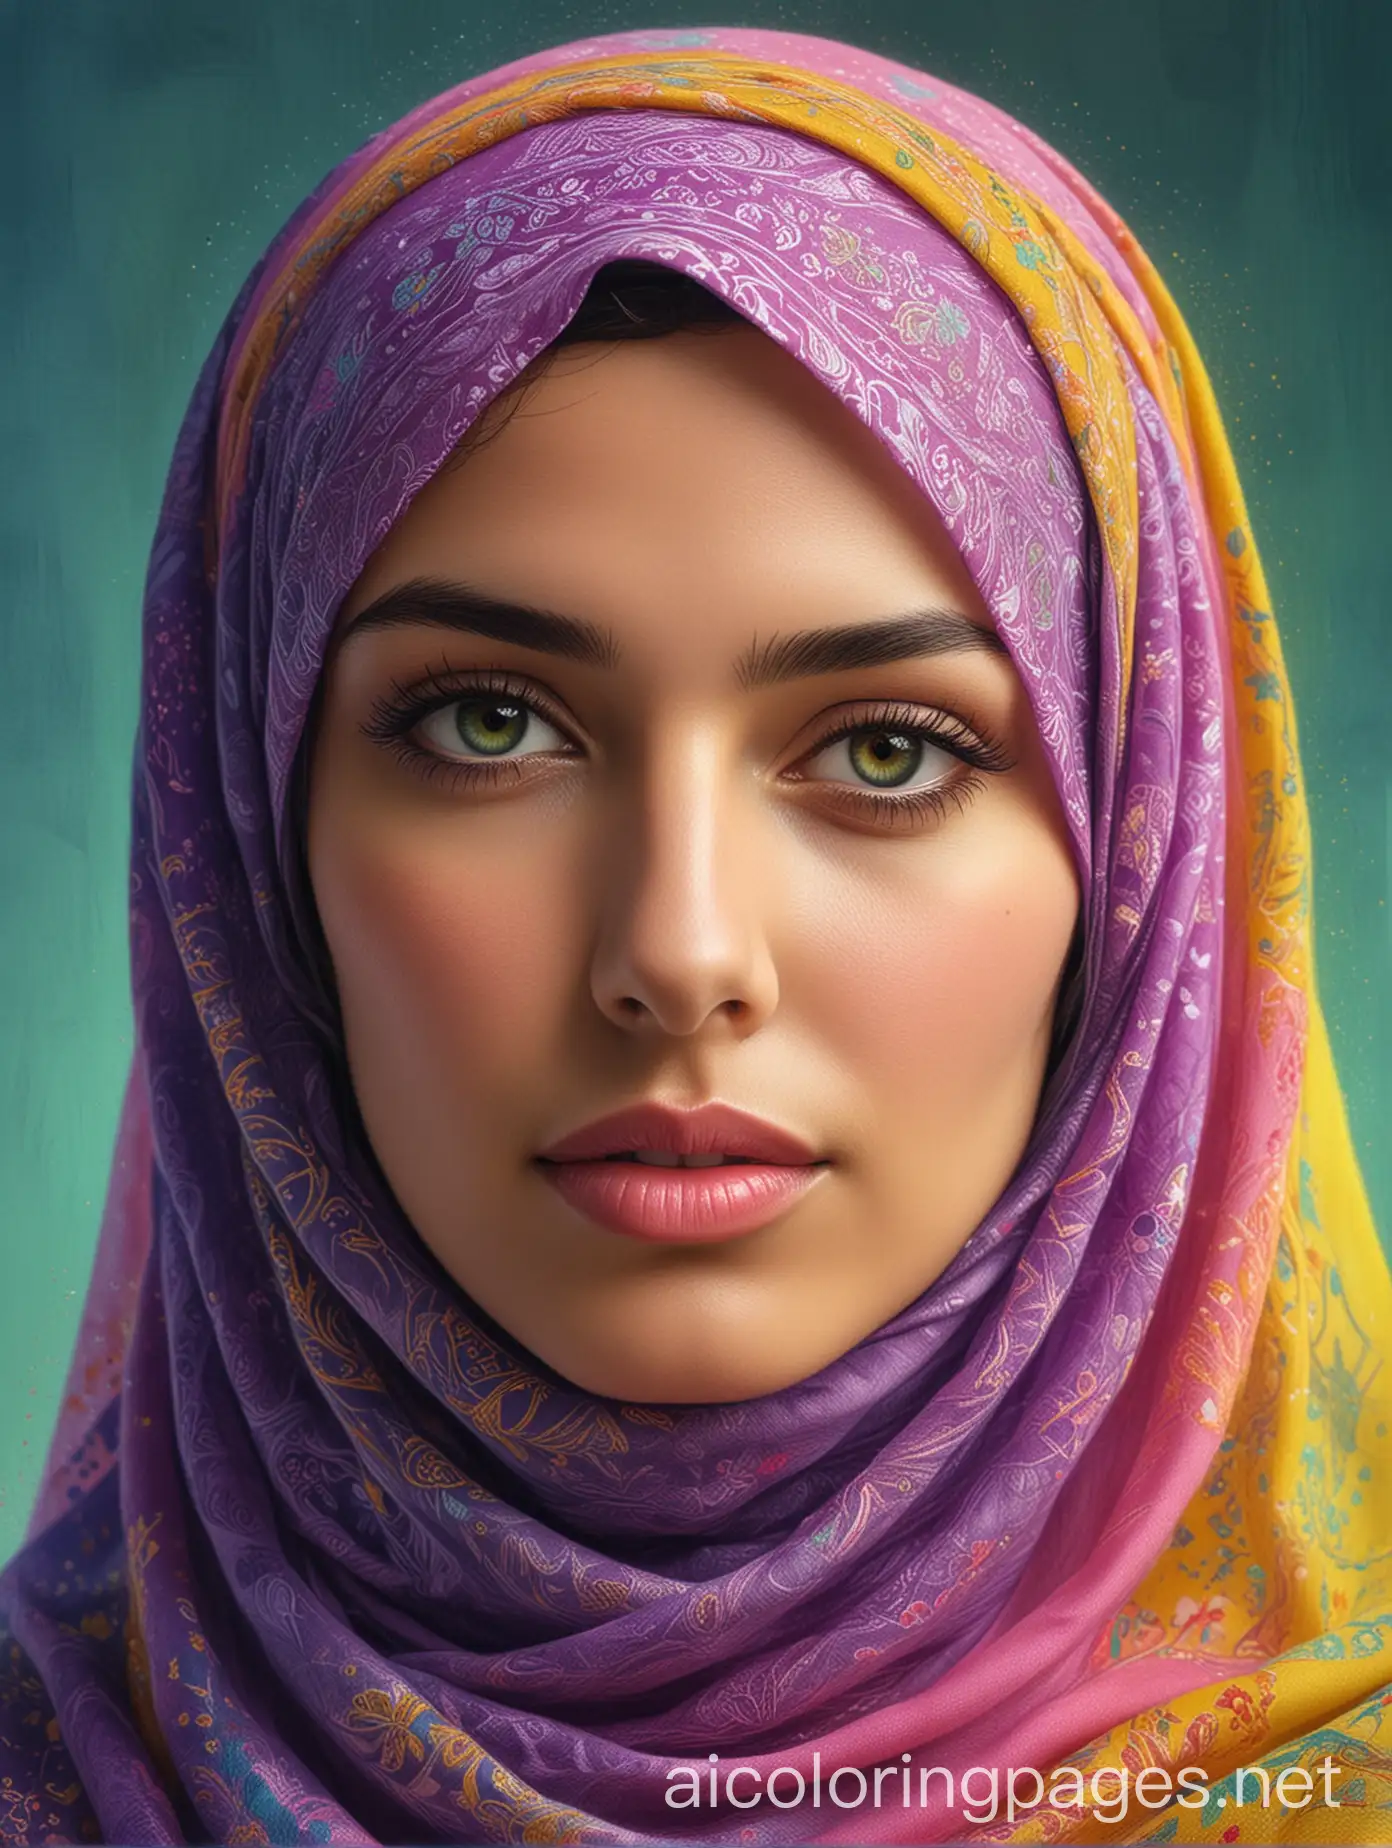 The photo shows a drawing of a woman wearing a hijab. The veil is colored light blue and yellow, and decorated with some other colors such as pink and green. The background of the image contains attractive artistic interference in bright colors, including purple, green, dark blue, and yellow. The drawing is characterized by its digital and artistic nature, giving a sense of modernity and beauty. The facial features are clear and precise, and reflect an artistic and creative touch. , Coloring Page, black and white, line art, white background, Simplicity, Ample White Space. The background of the coloring page is plain white to make it easy for young children to color within the lines. The outlines of all the subjects are easy to distinguish, making it simple for kids to color without too much difficulty